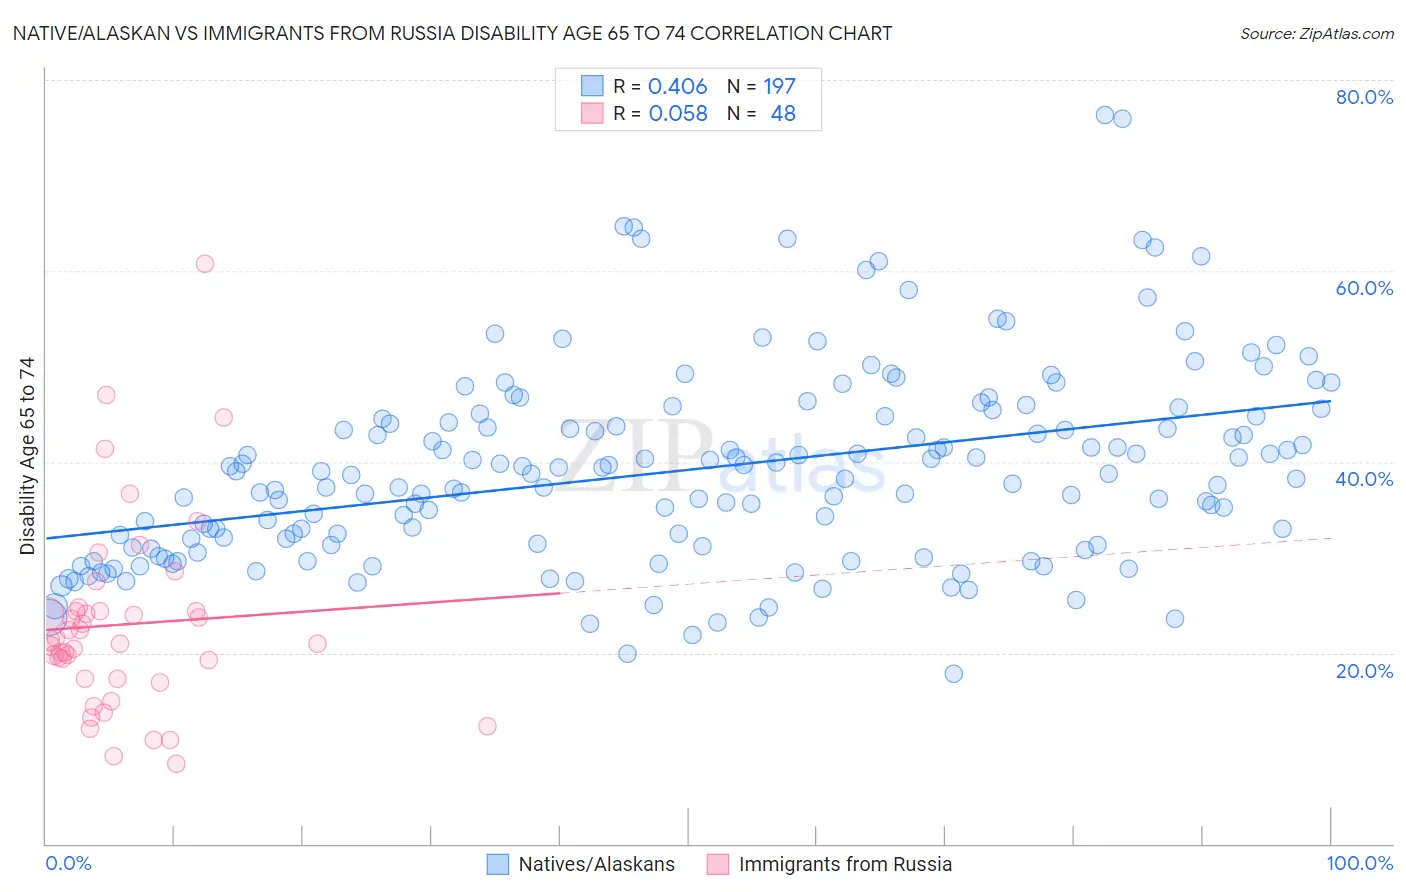 Native/Alaskan vs Immigrants from Russia Disability Age 65 to 74